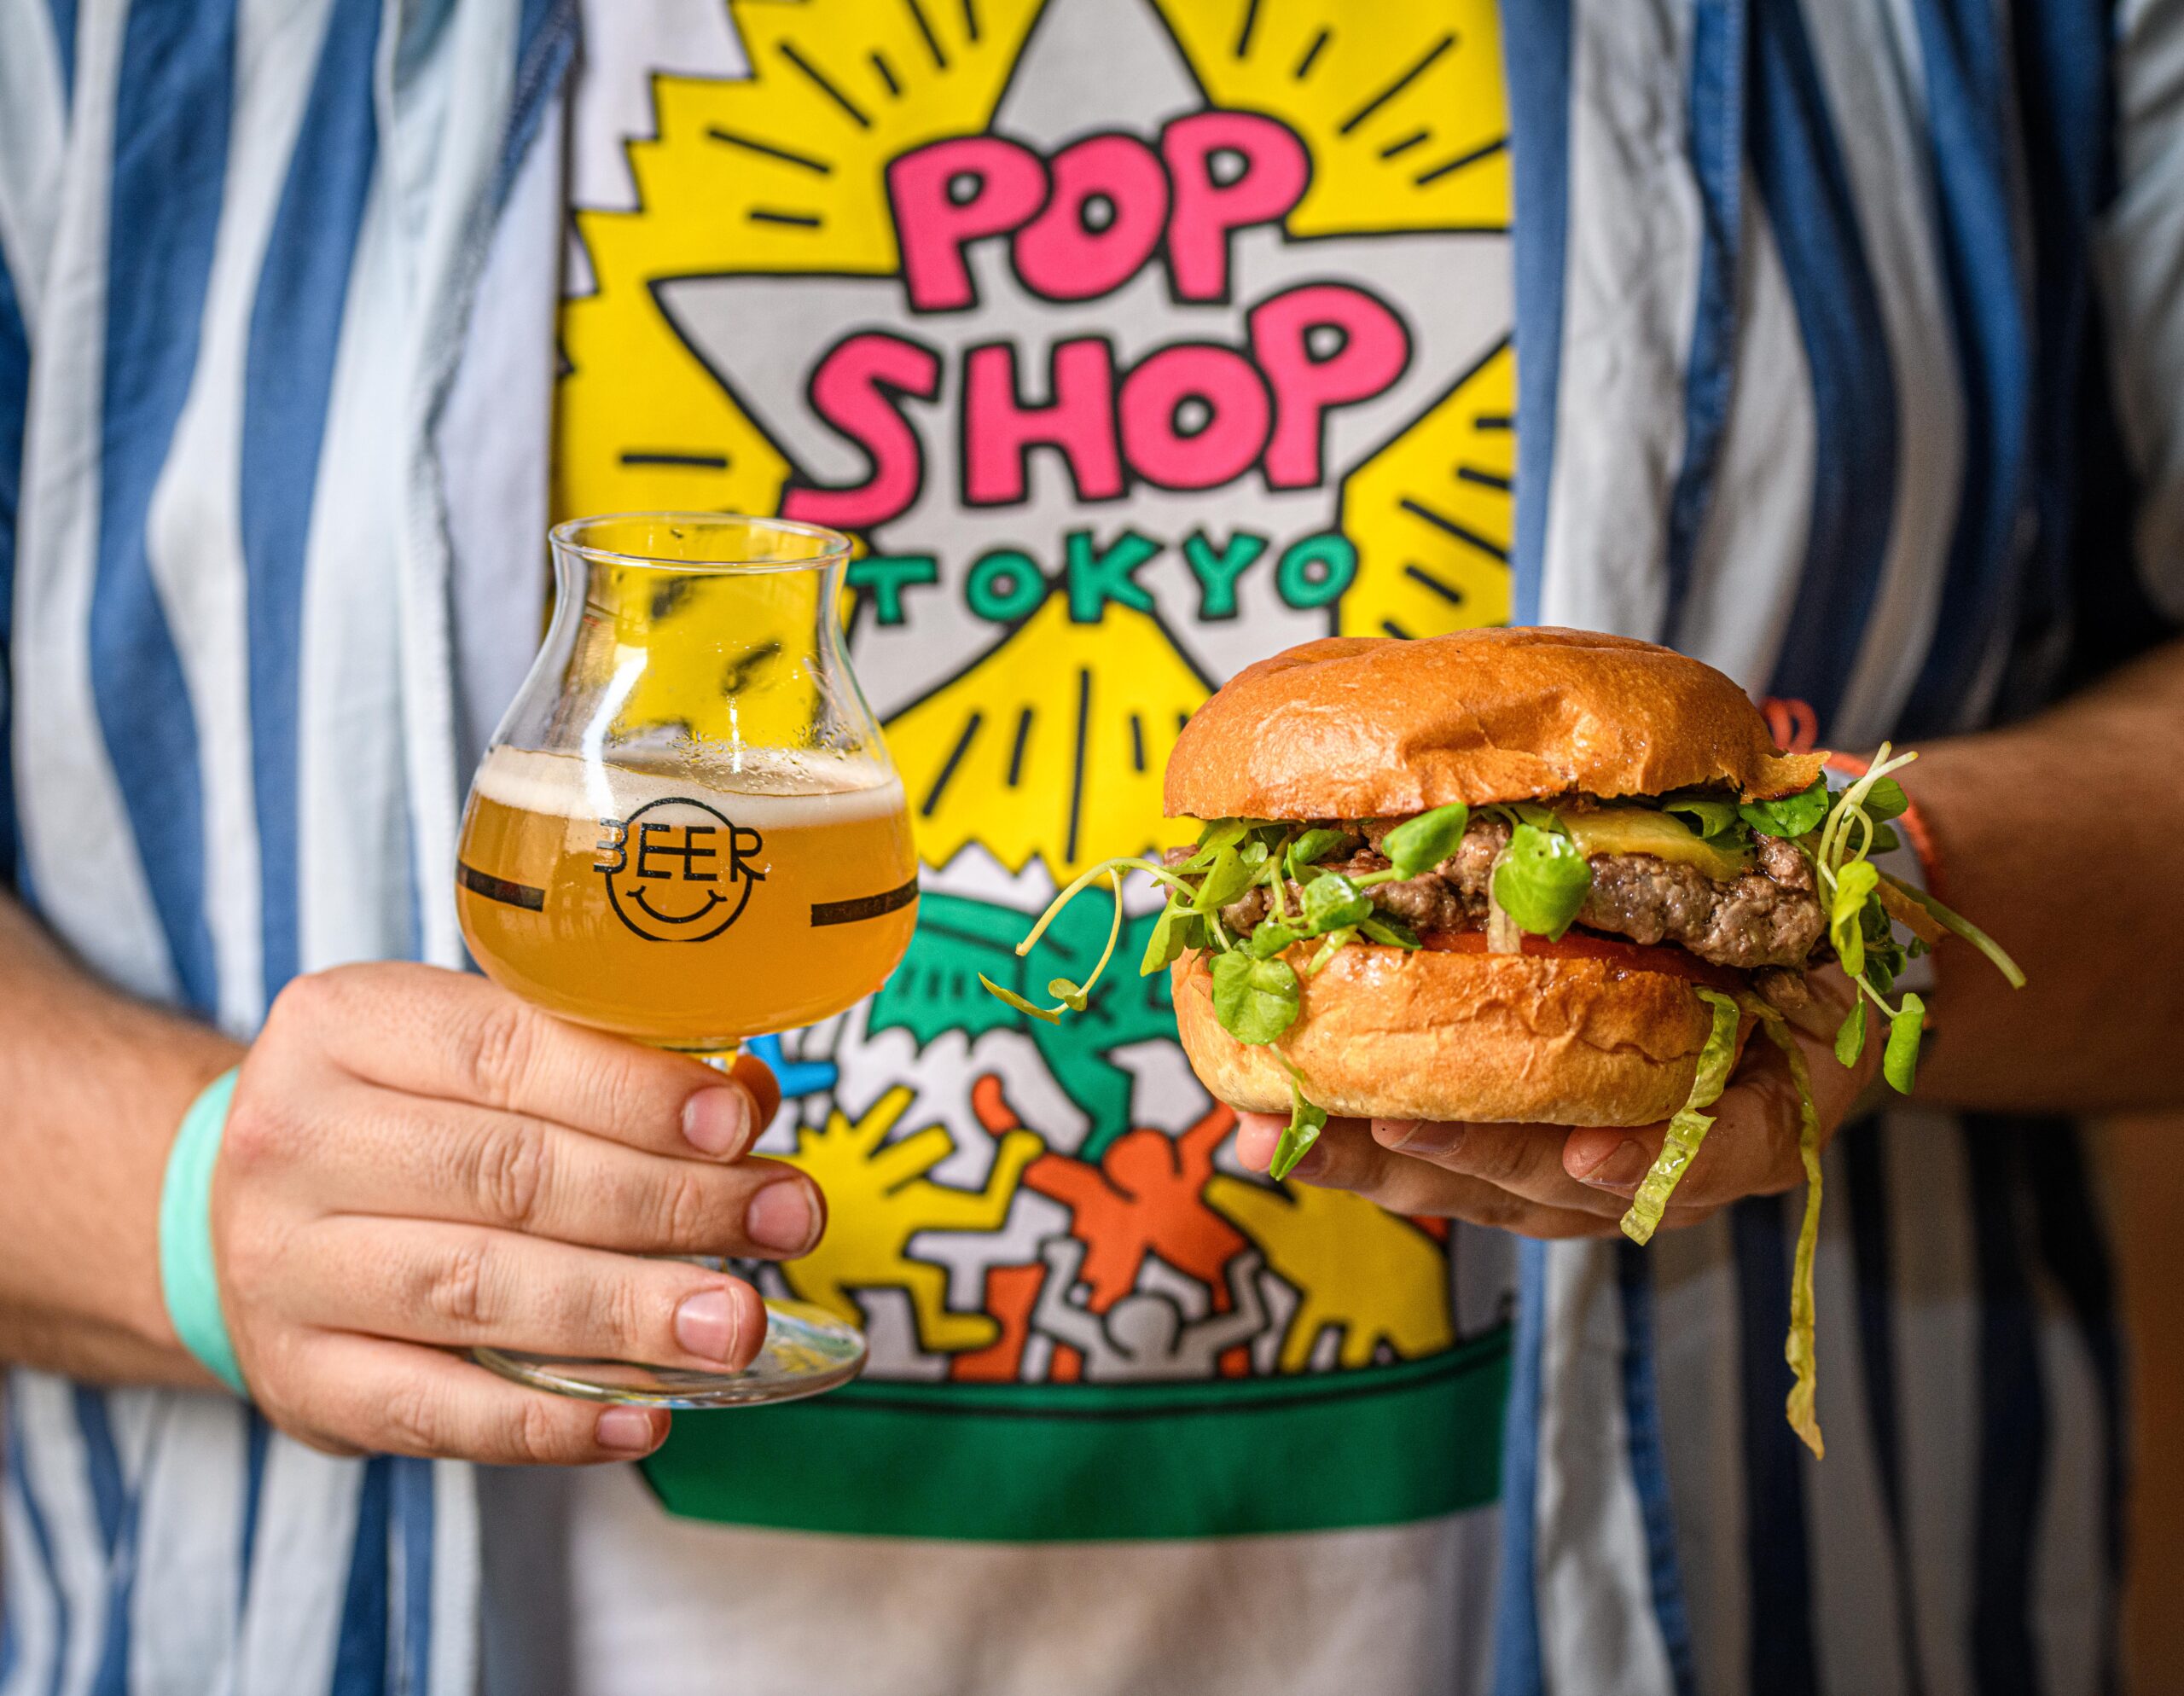 Manchester Craft Beer Festival will have a food block party